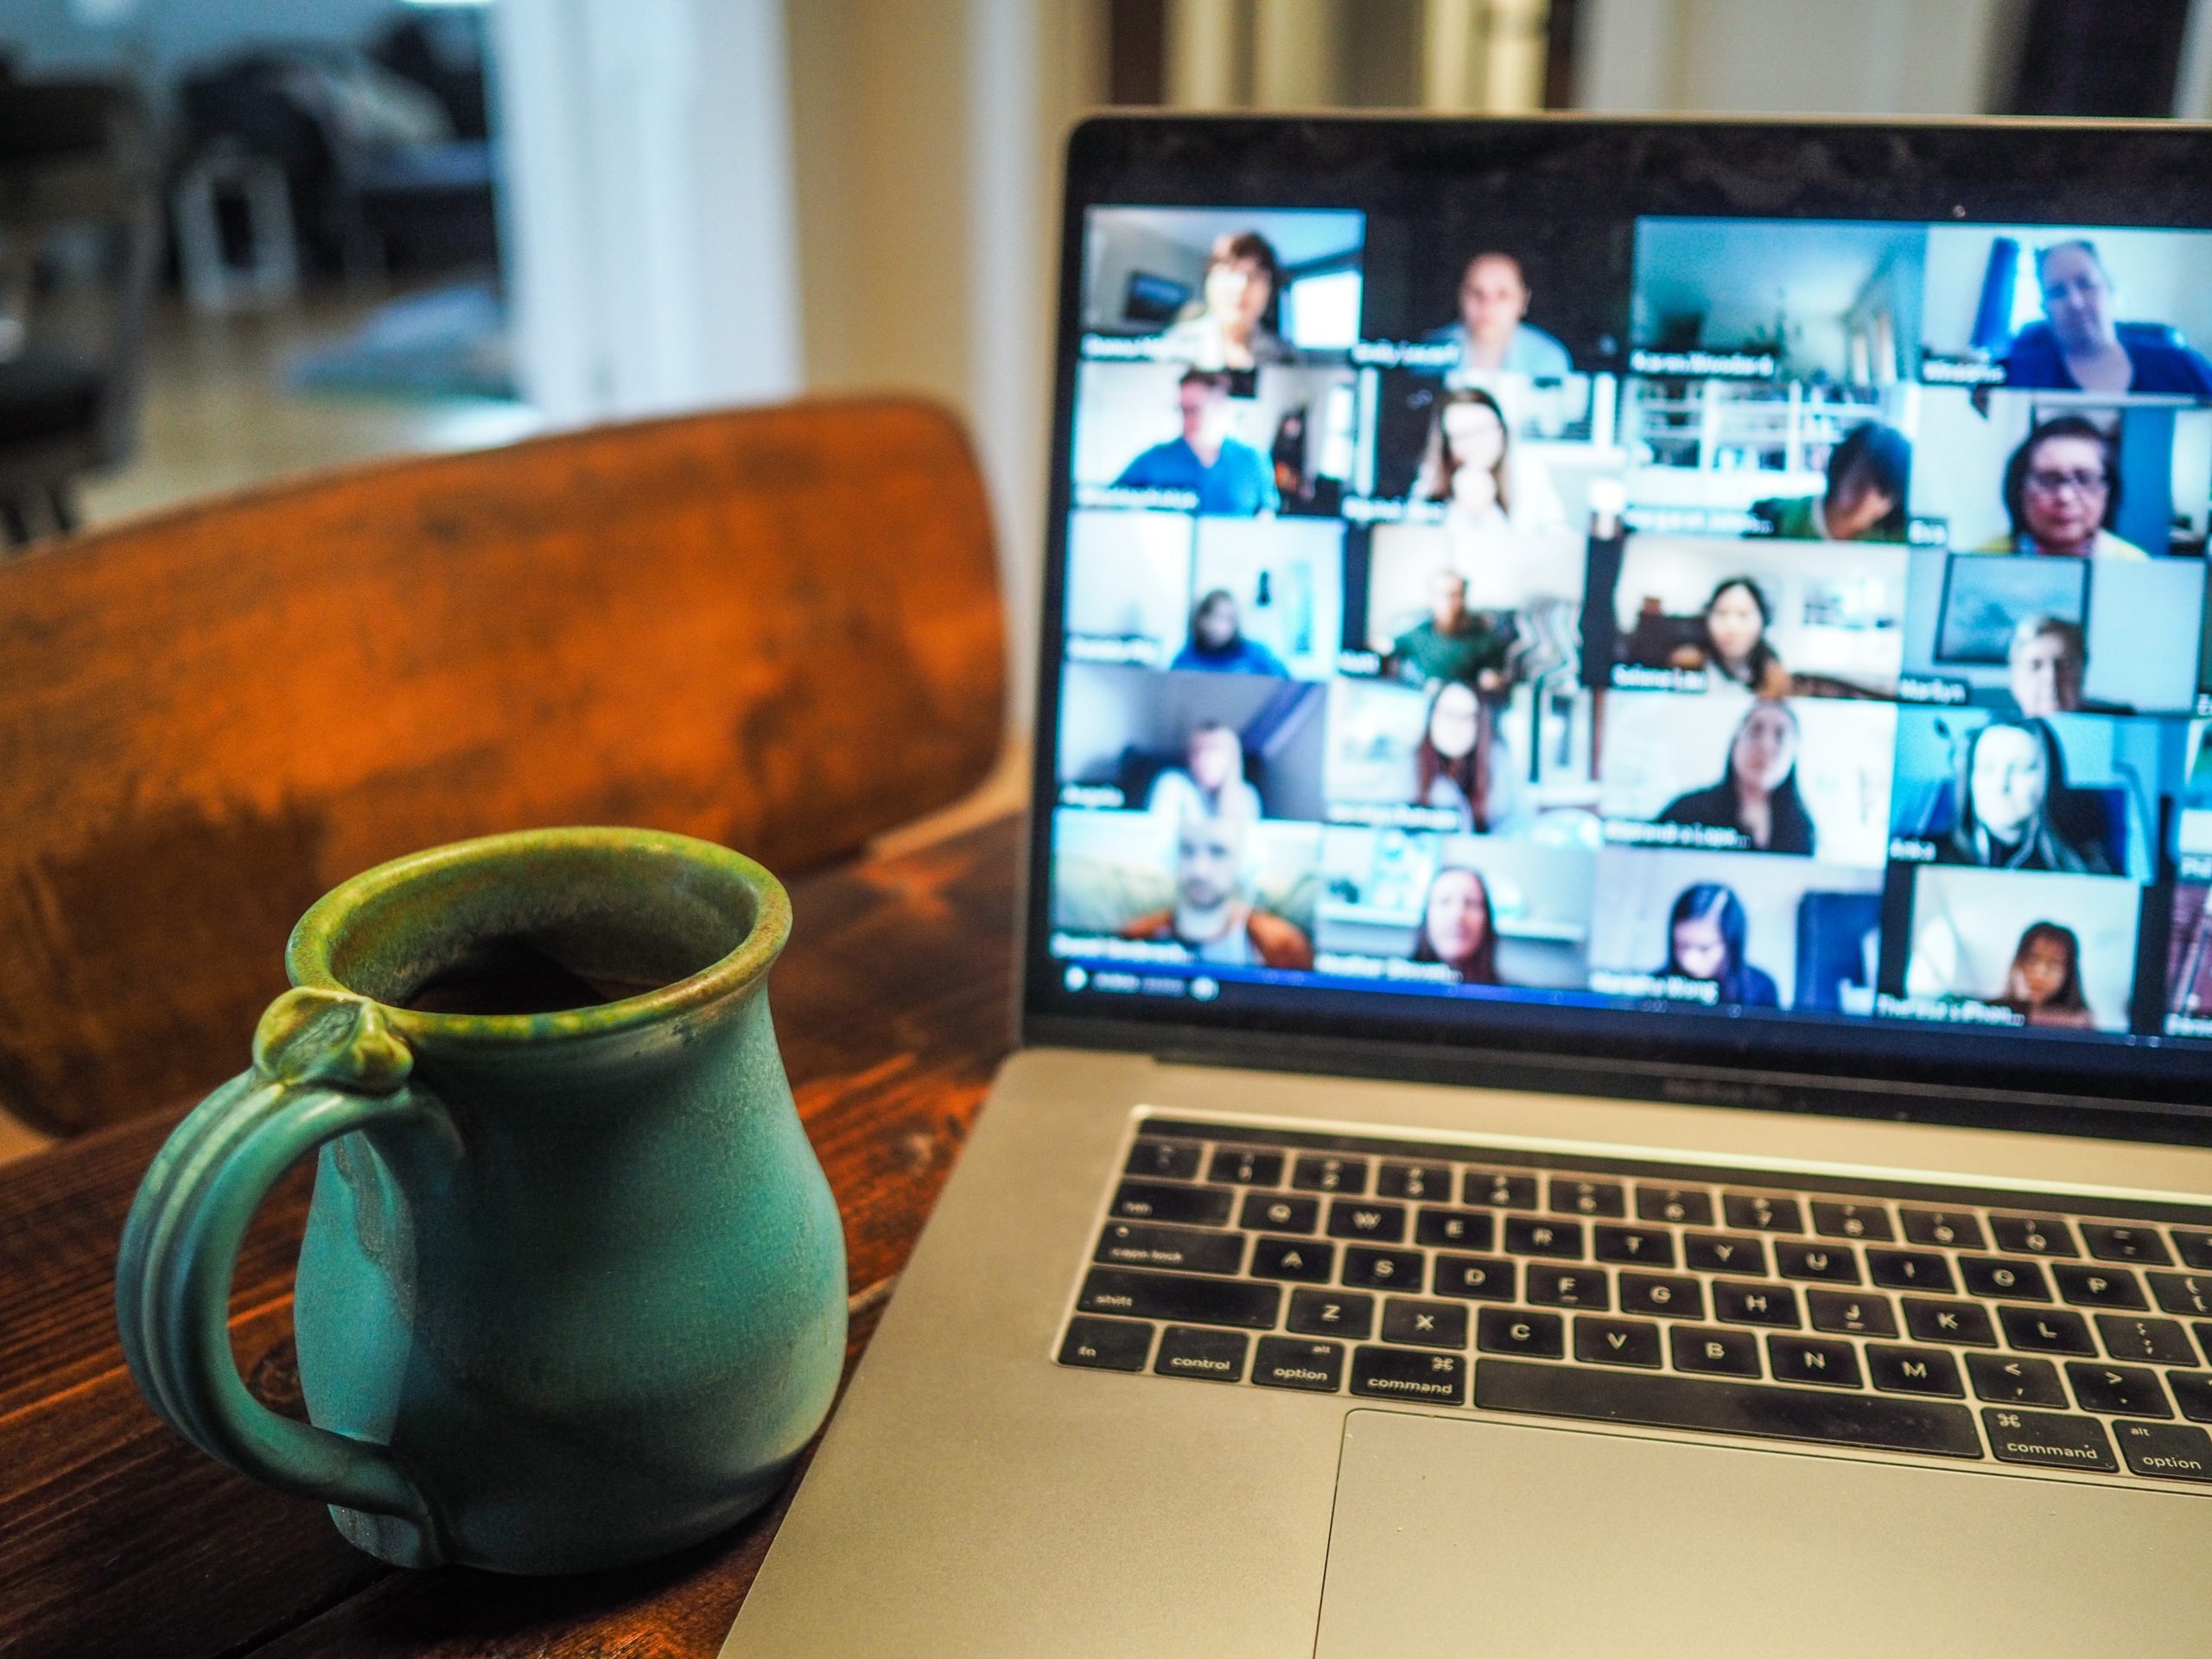 |Working remote or working from home is a new reality for a lot of us. We take a look at a few popular video conferencing platforms to help stay in touch.